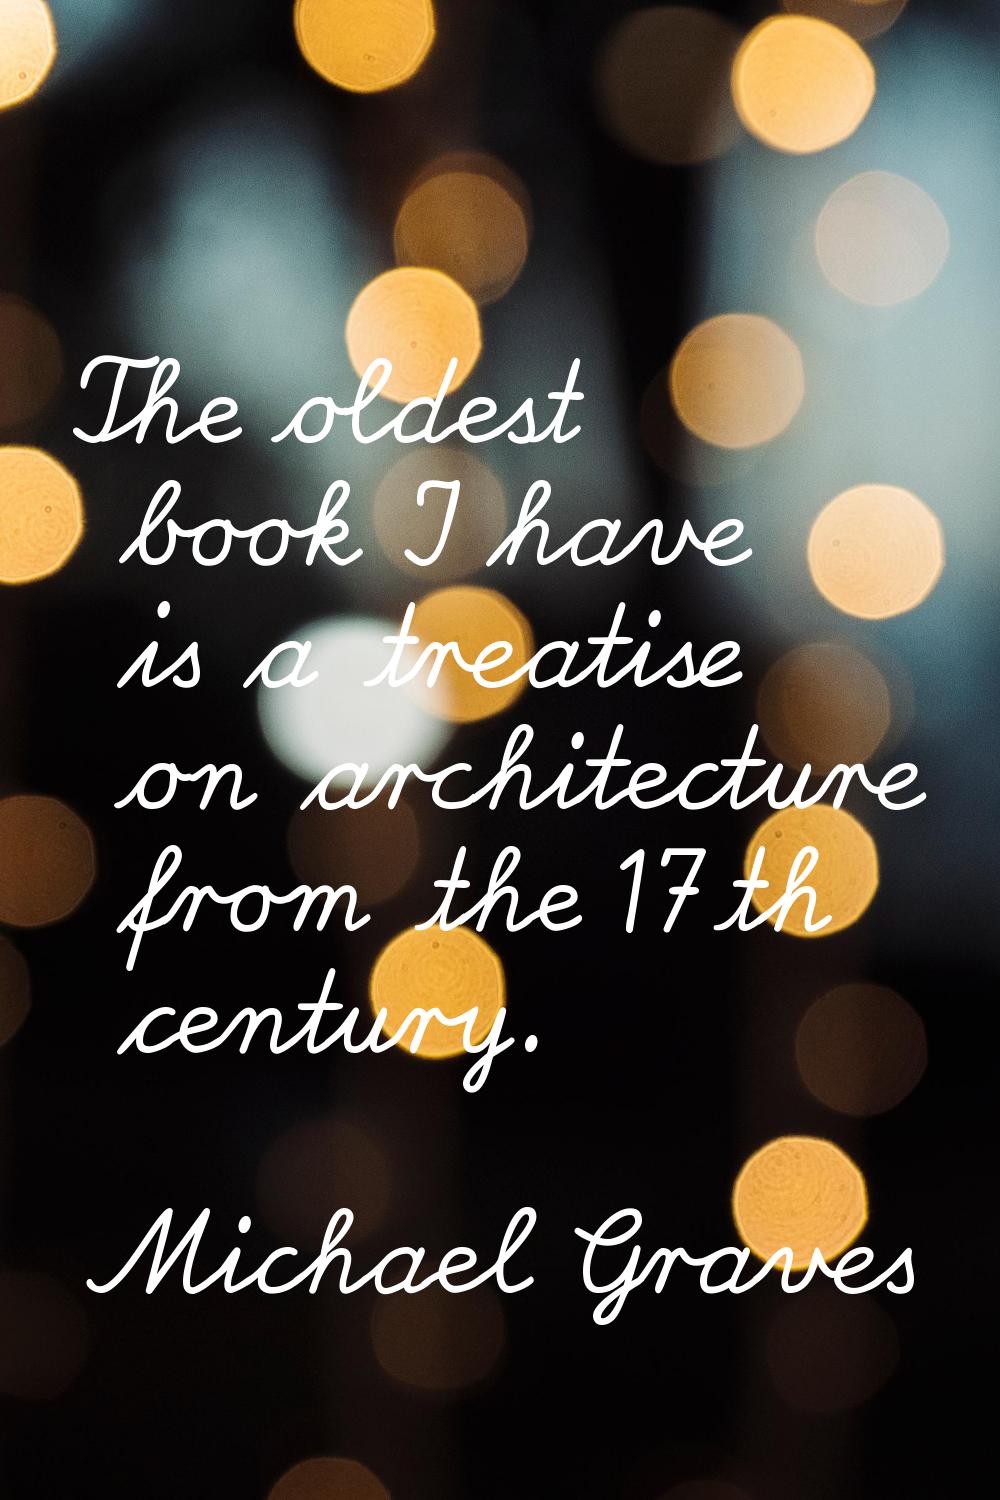 The oldest book I have is a treatise on architecture from the 17th century.